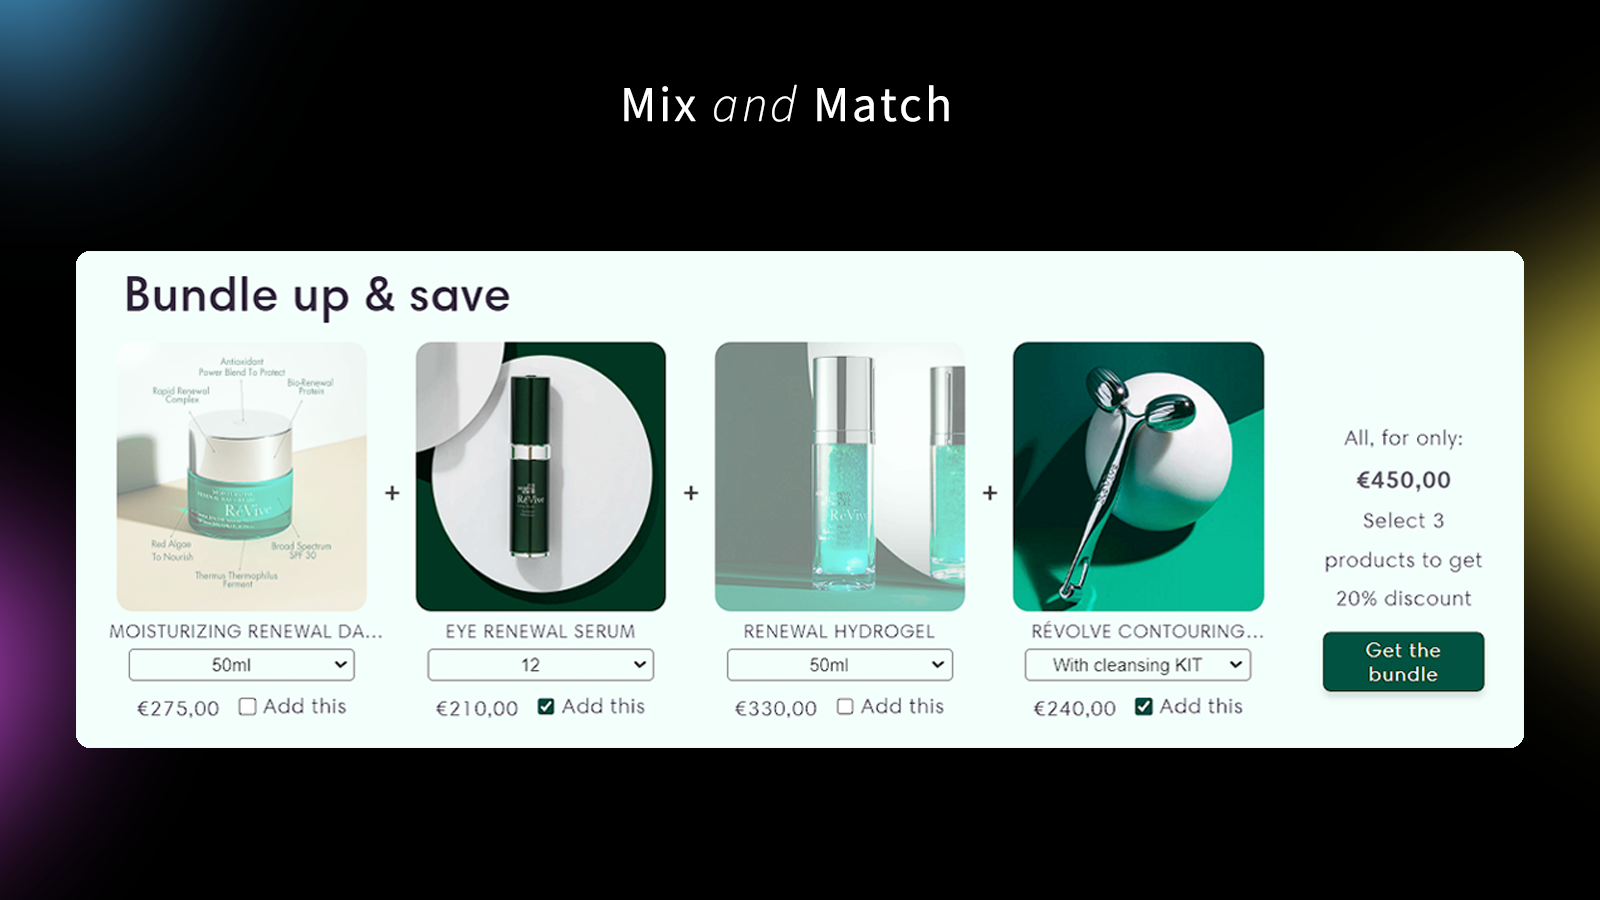 Shopify mix and match bundle offers with complicated discounts